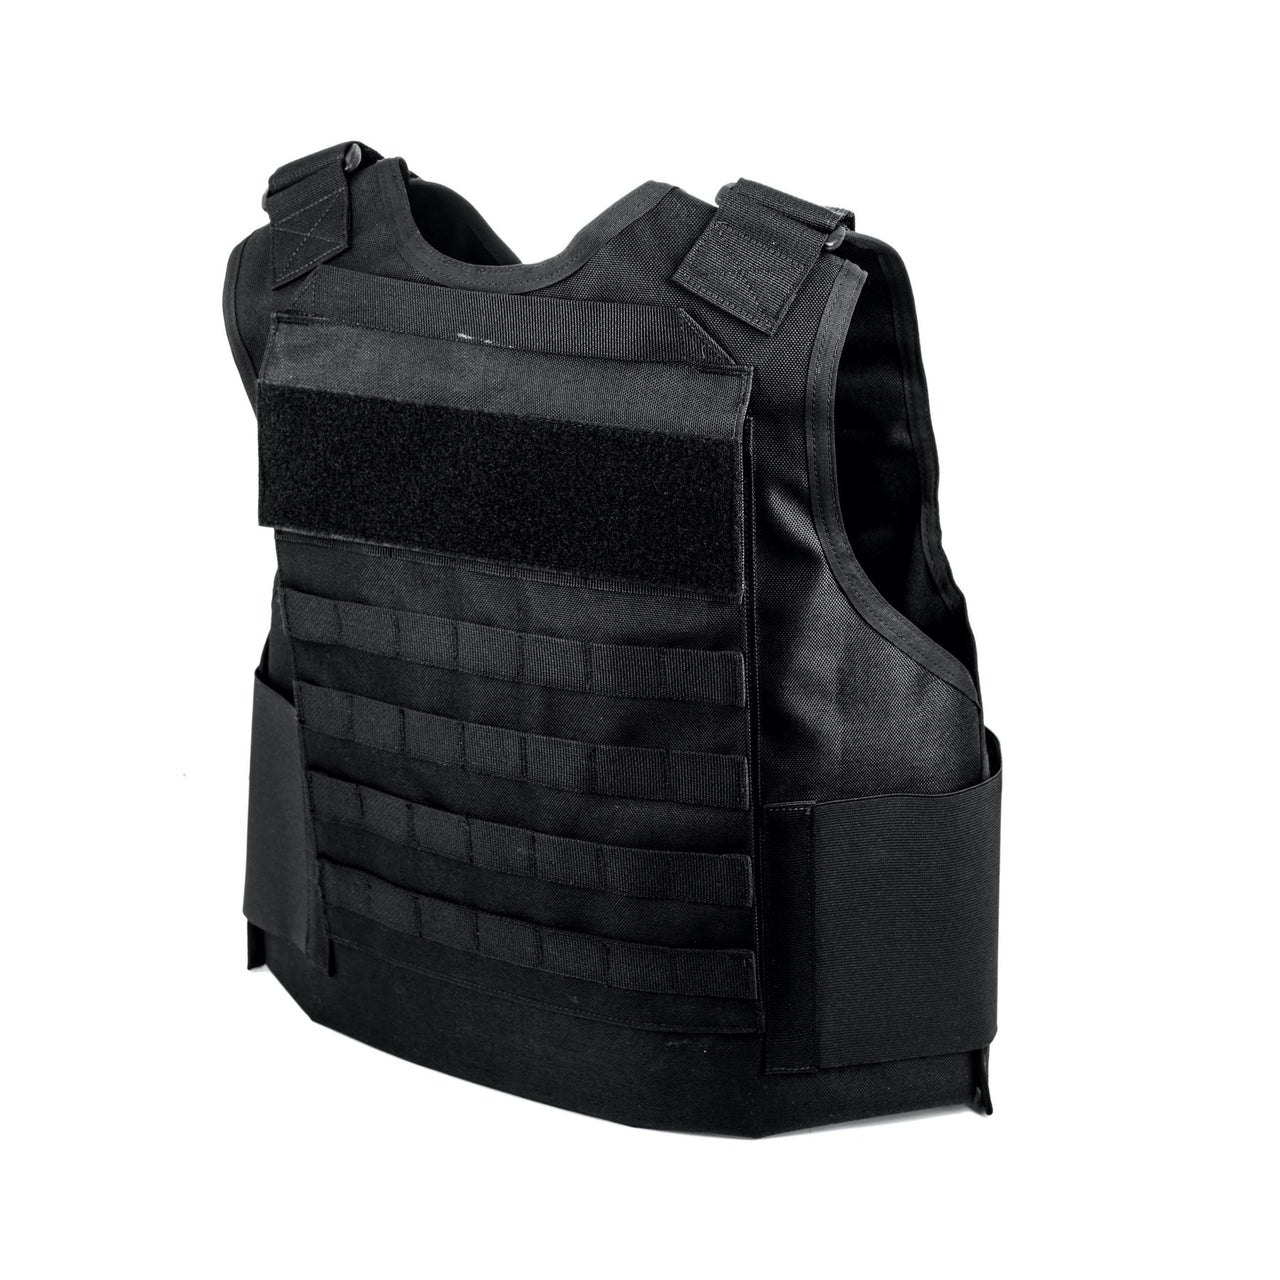 A Body Armor Direct All Star Tactical Enhanced Multi-Threat Vest plate carrier on a white background.